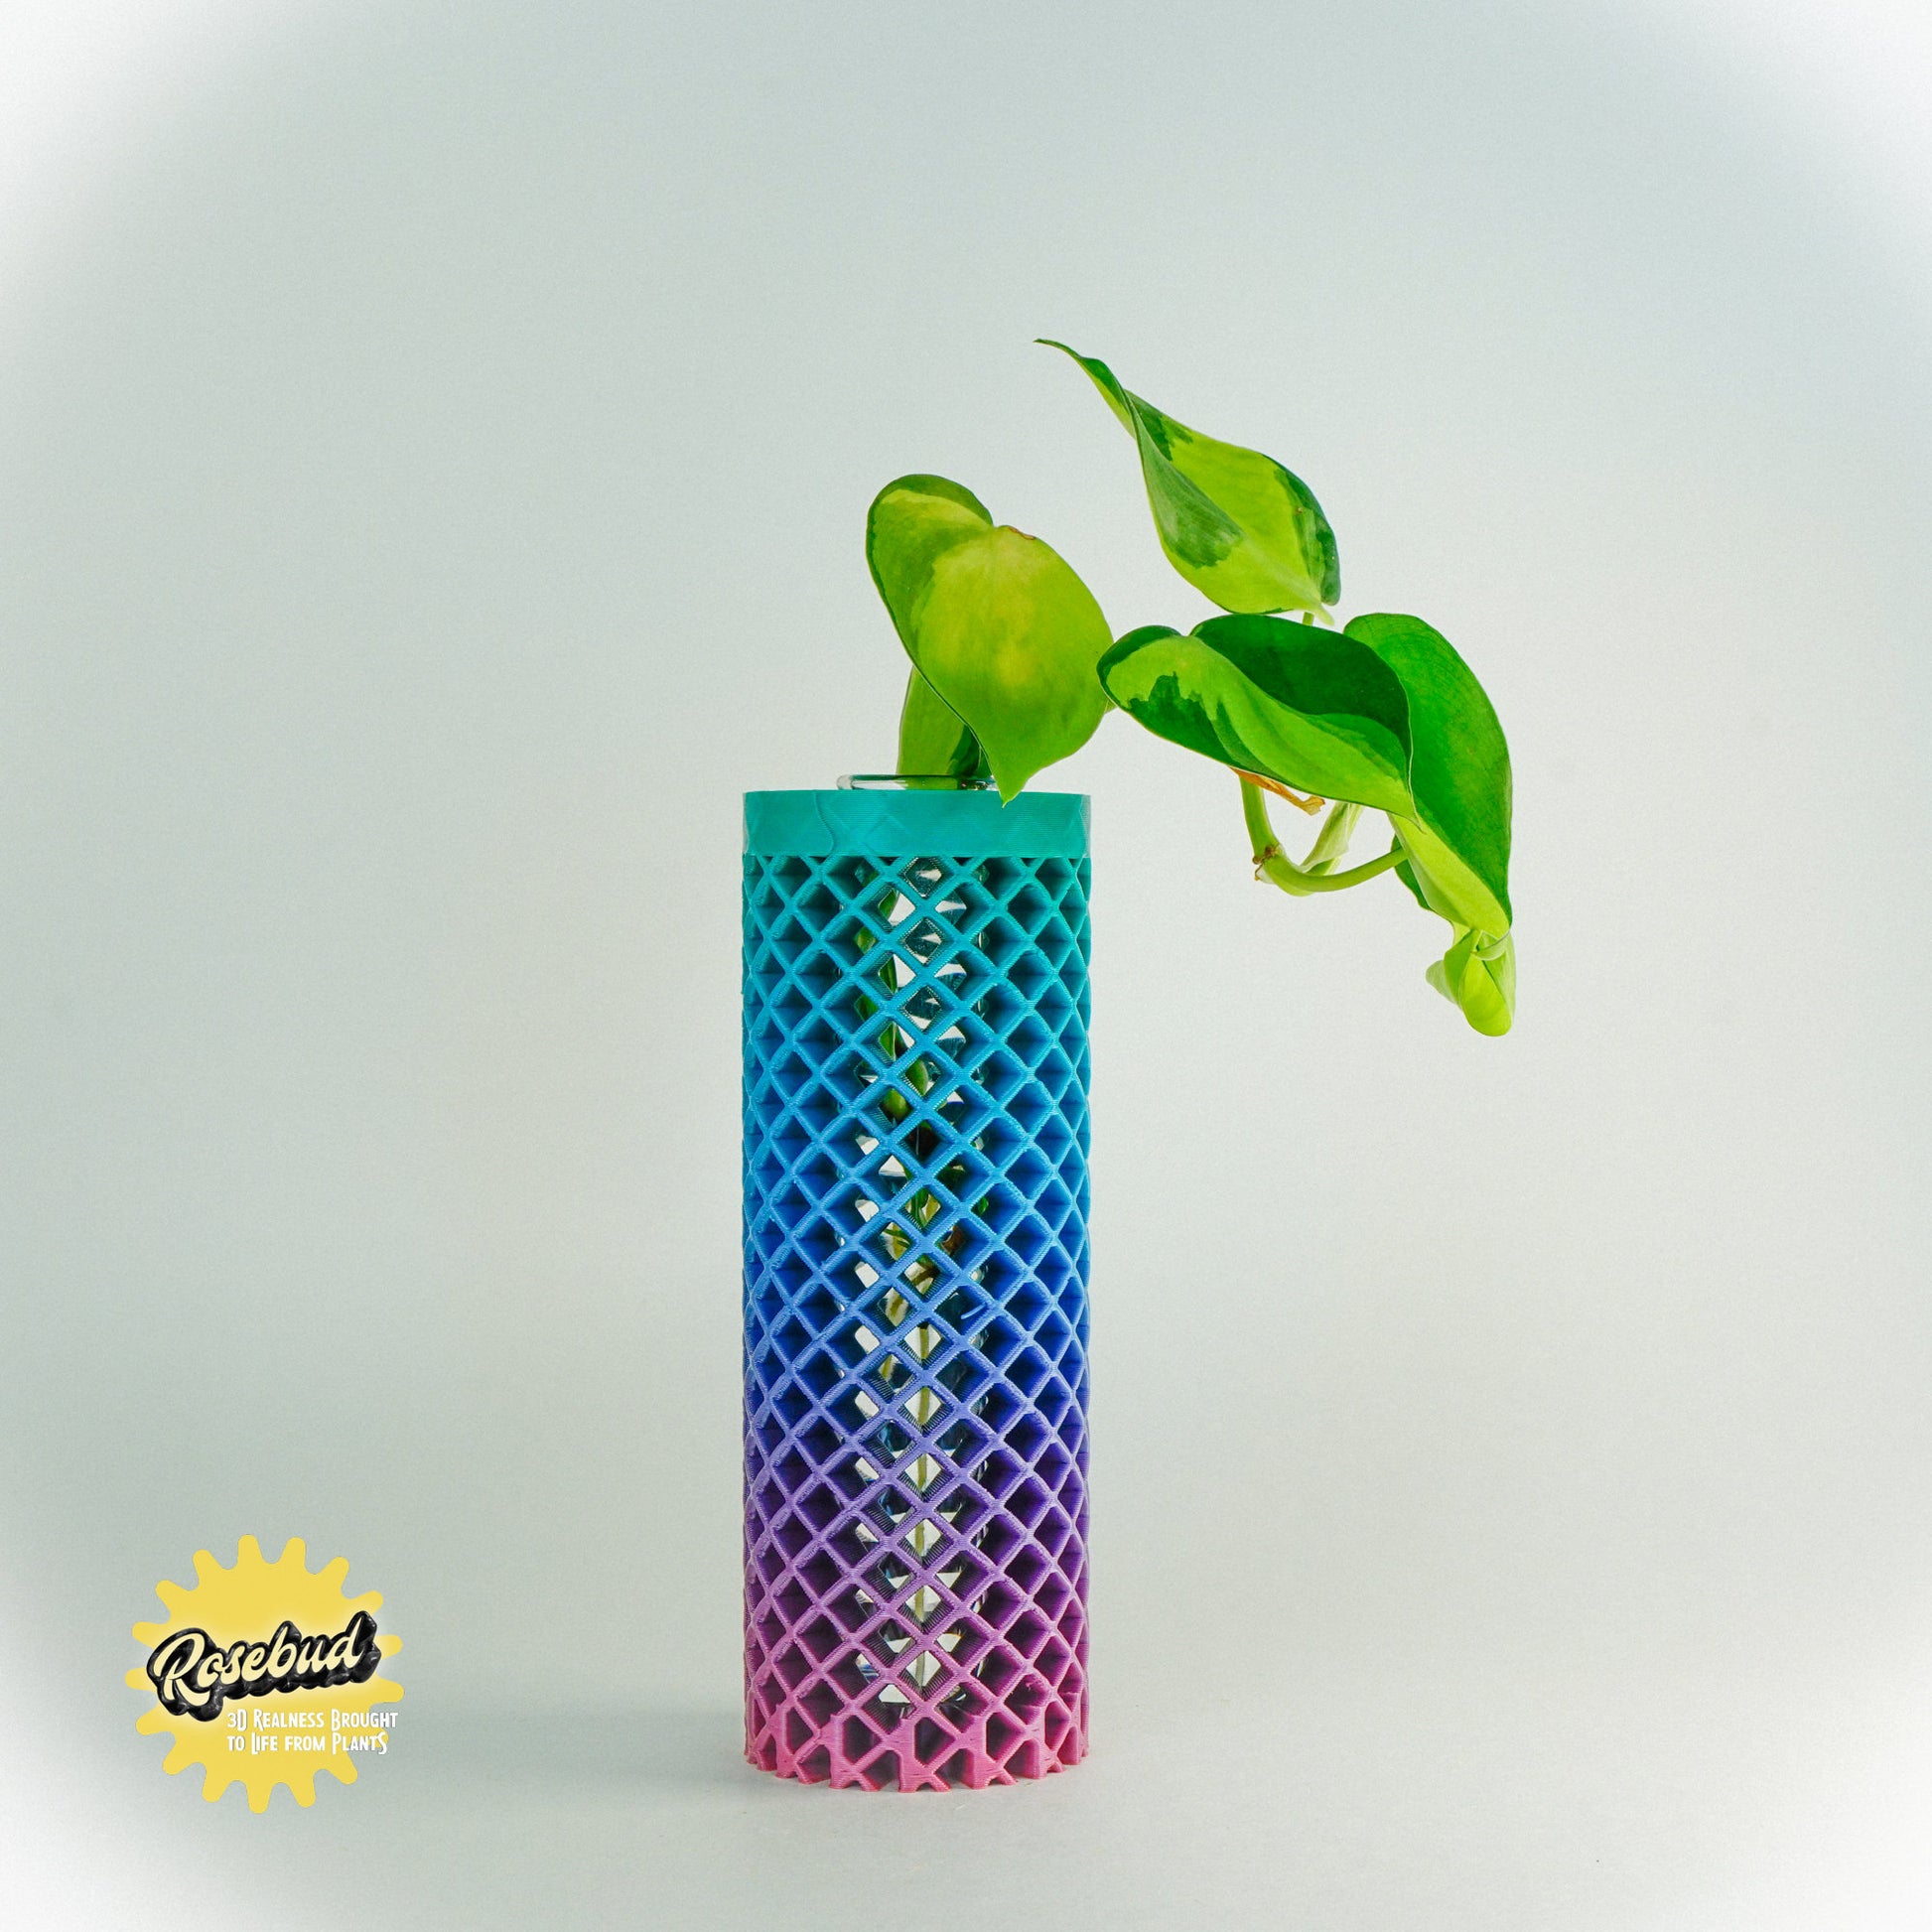 Propagation Station for Plant Cuttings, Bookshelf Table Decor, Multiple Sizes and Colors, 3D Printed Vase, Gifts for Plant Lovers, Posiedon